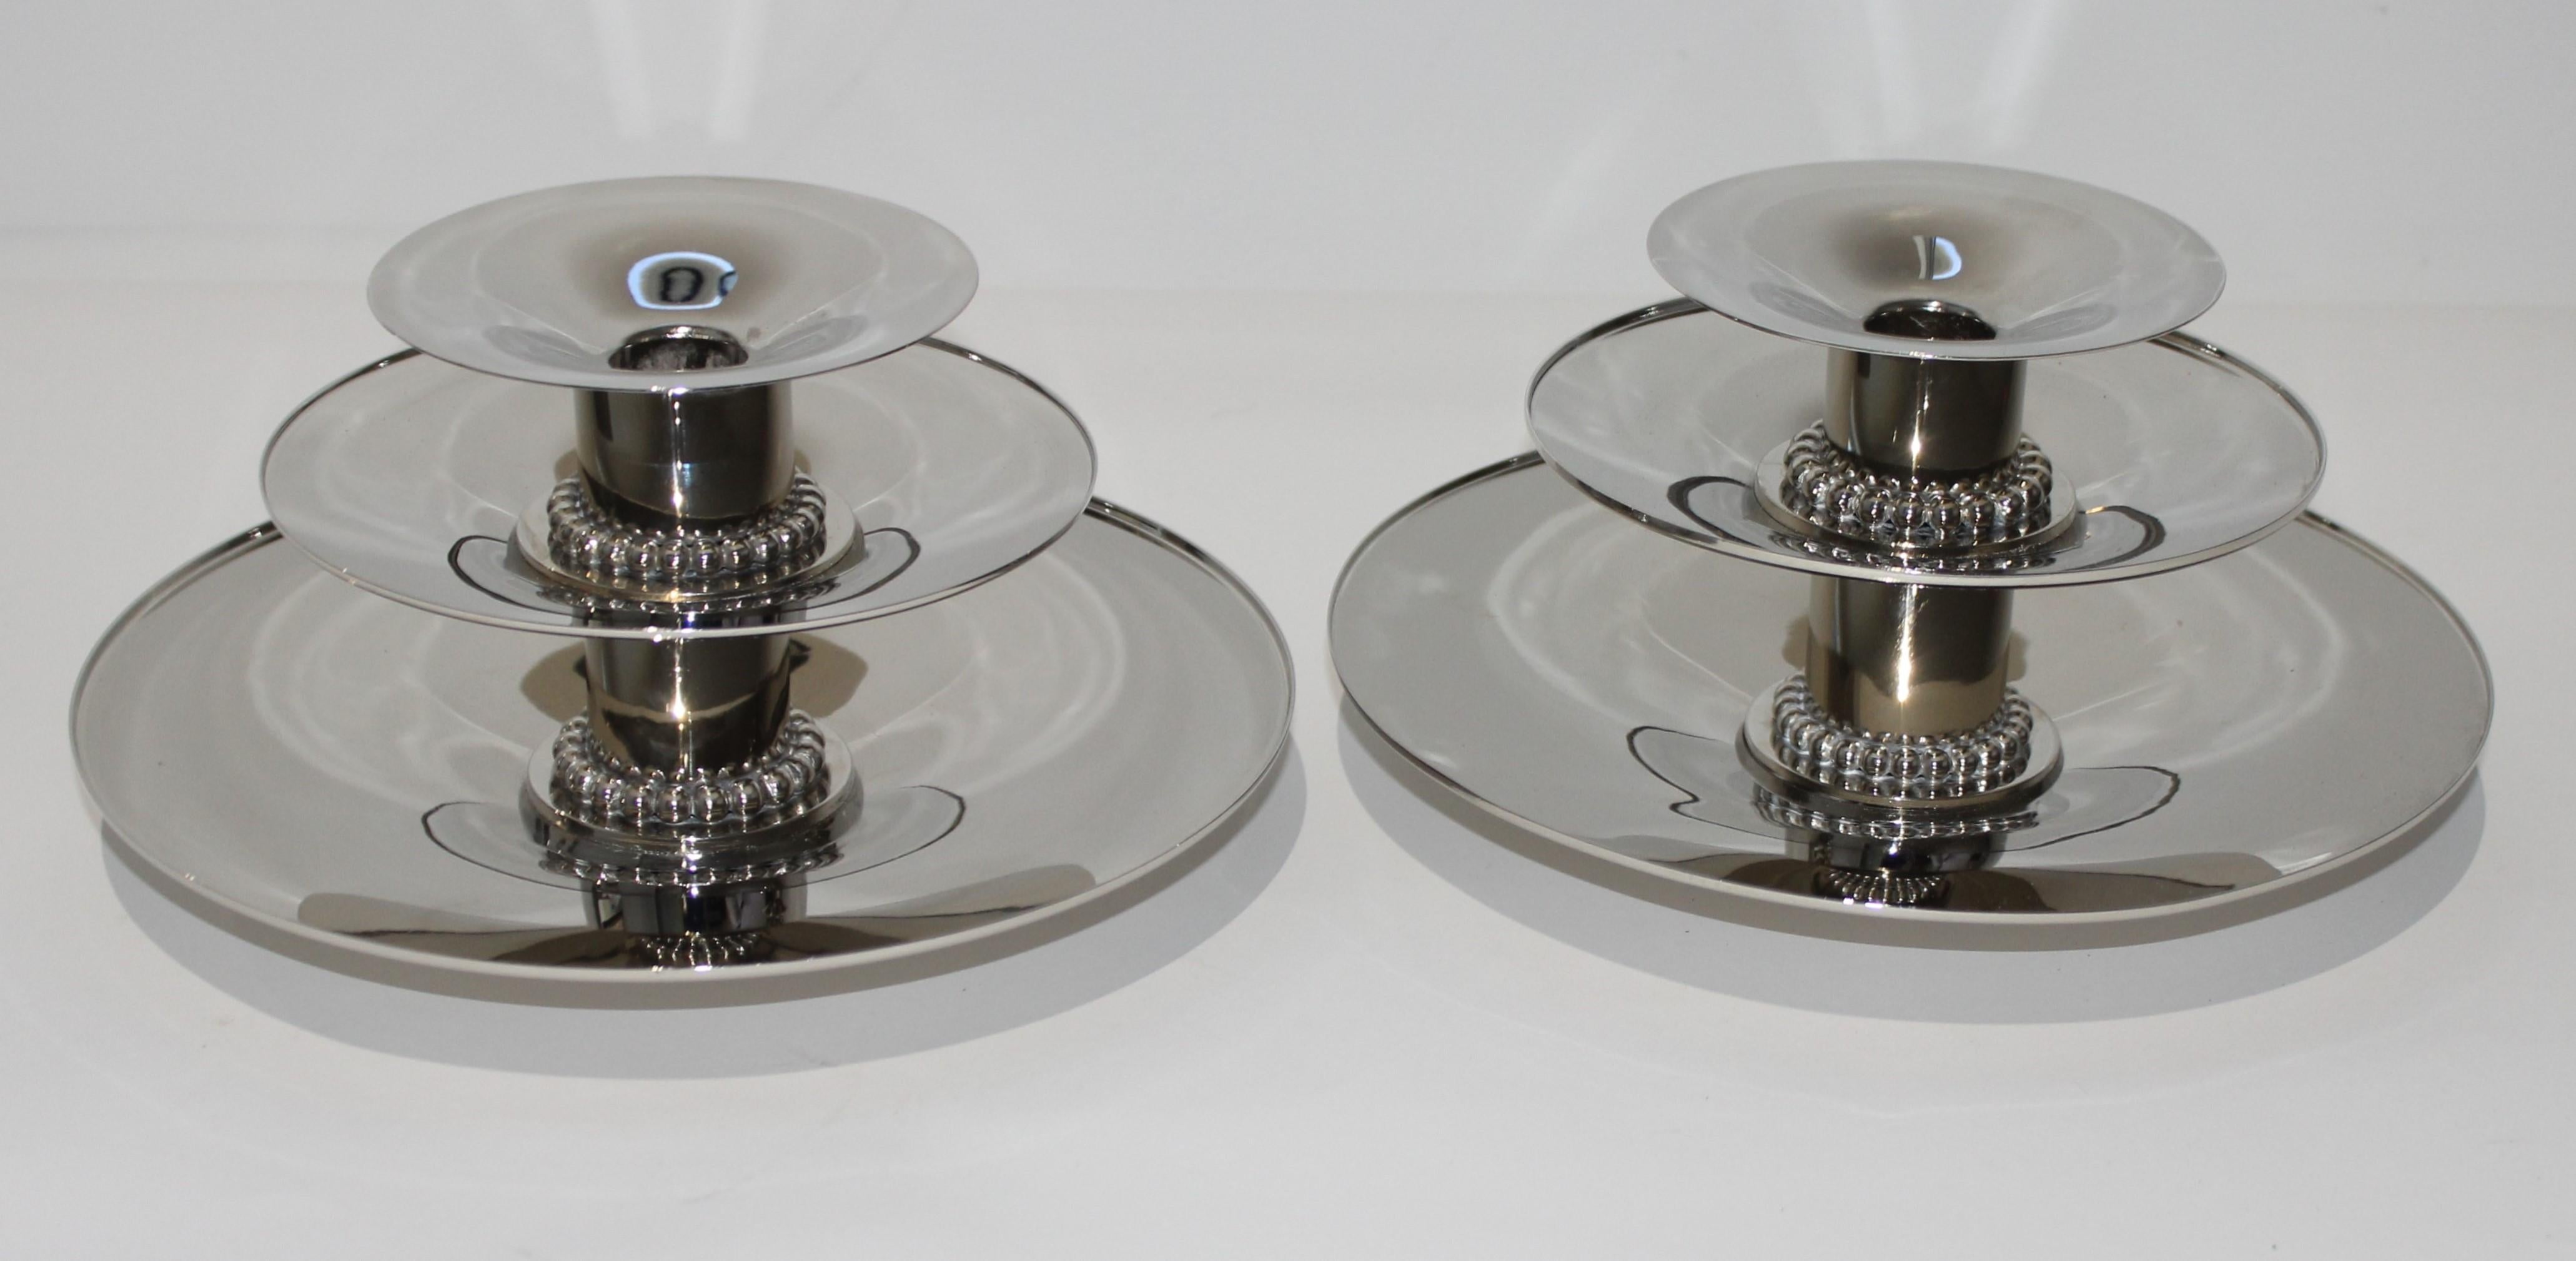 This stylish pair of Carole Stuppell Art Deco candleholders date to the 1930s and have recently been restored with a nickel plated finish.

The can be used solely as candleholders or perhaps with a candle and cut flowers on the two lower